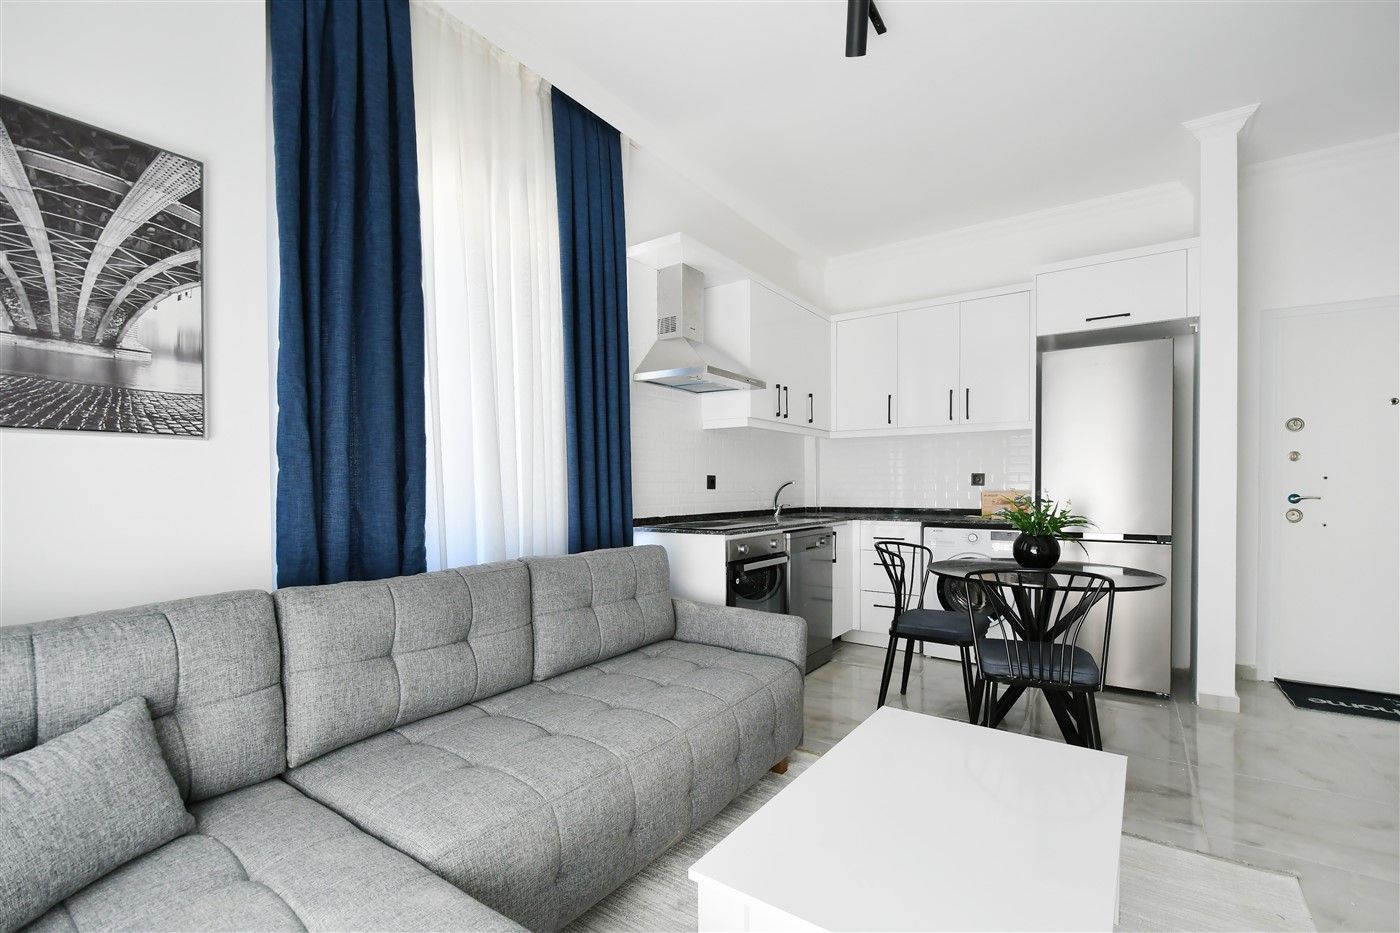 Stylish 1bedroom apartment with furniture and household appliances